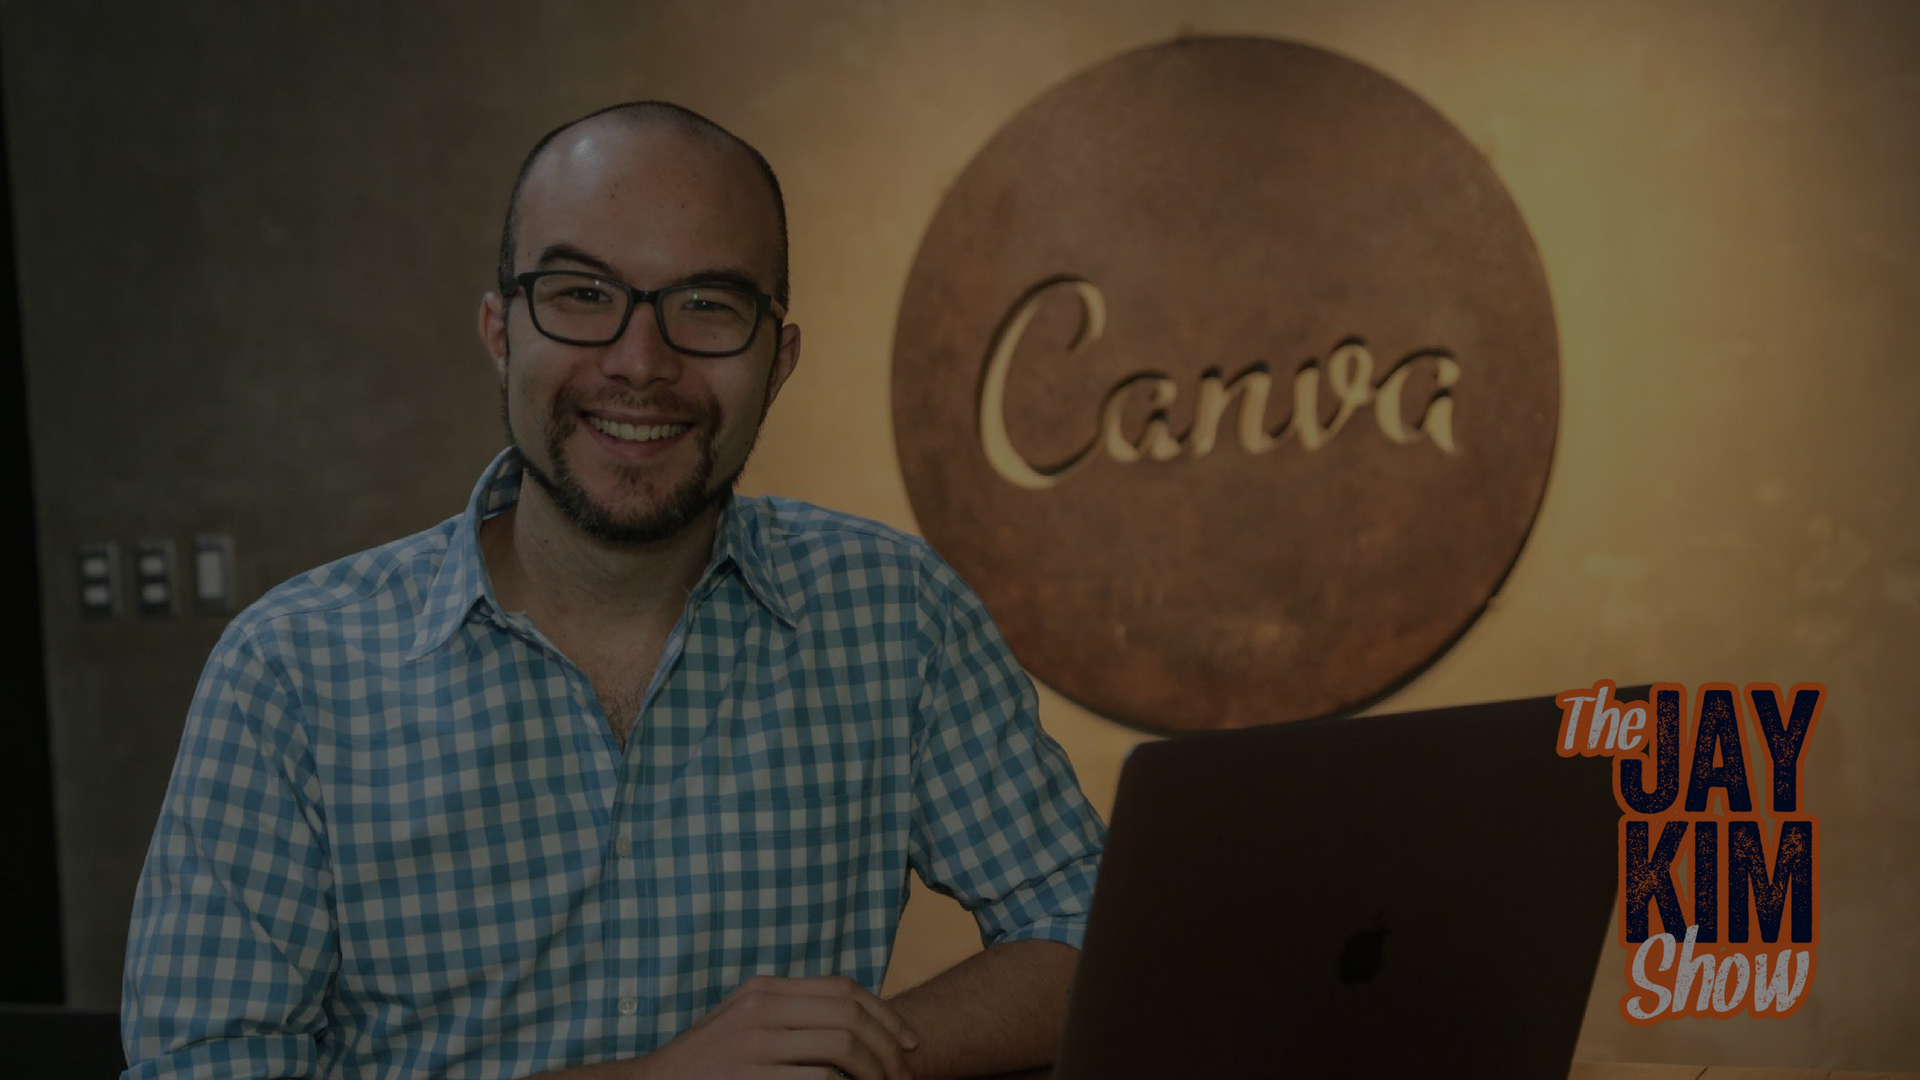 106: Cameron Adams, co-founder and chief product officer of Canva